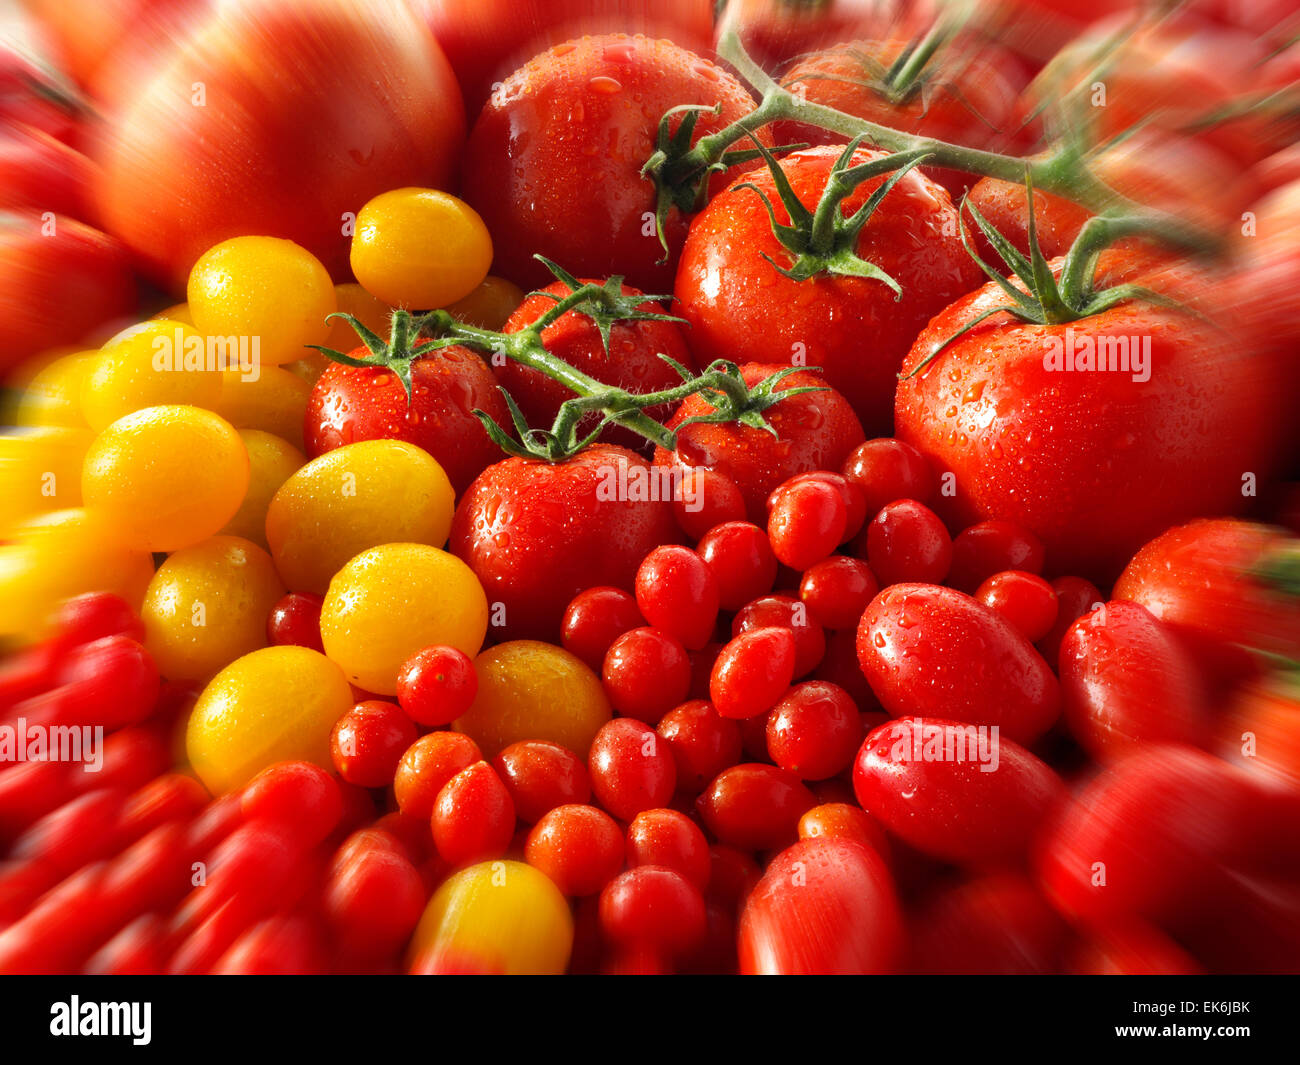 mixed whole yellow & red fresh vine tomatoes with a zoom effect Stock Photo